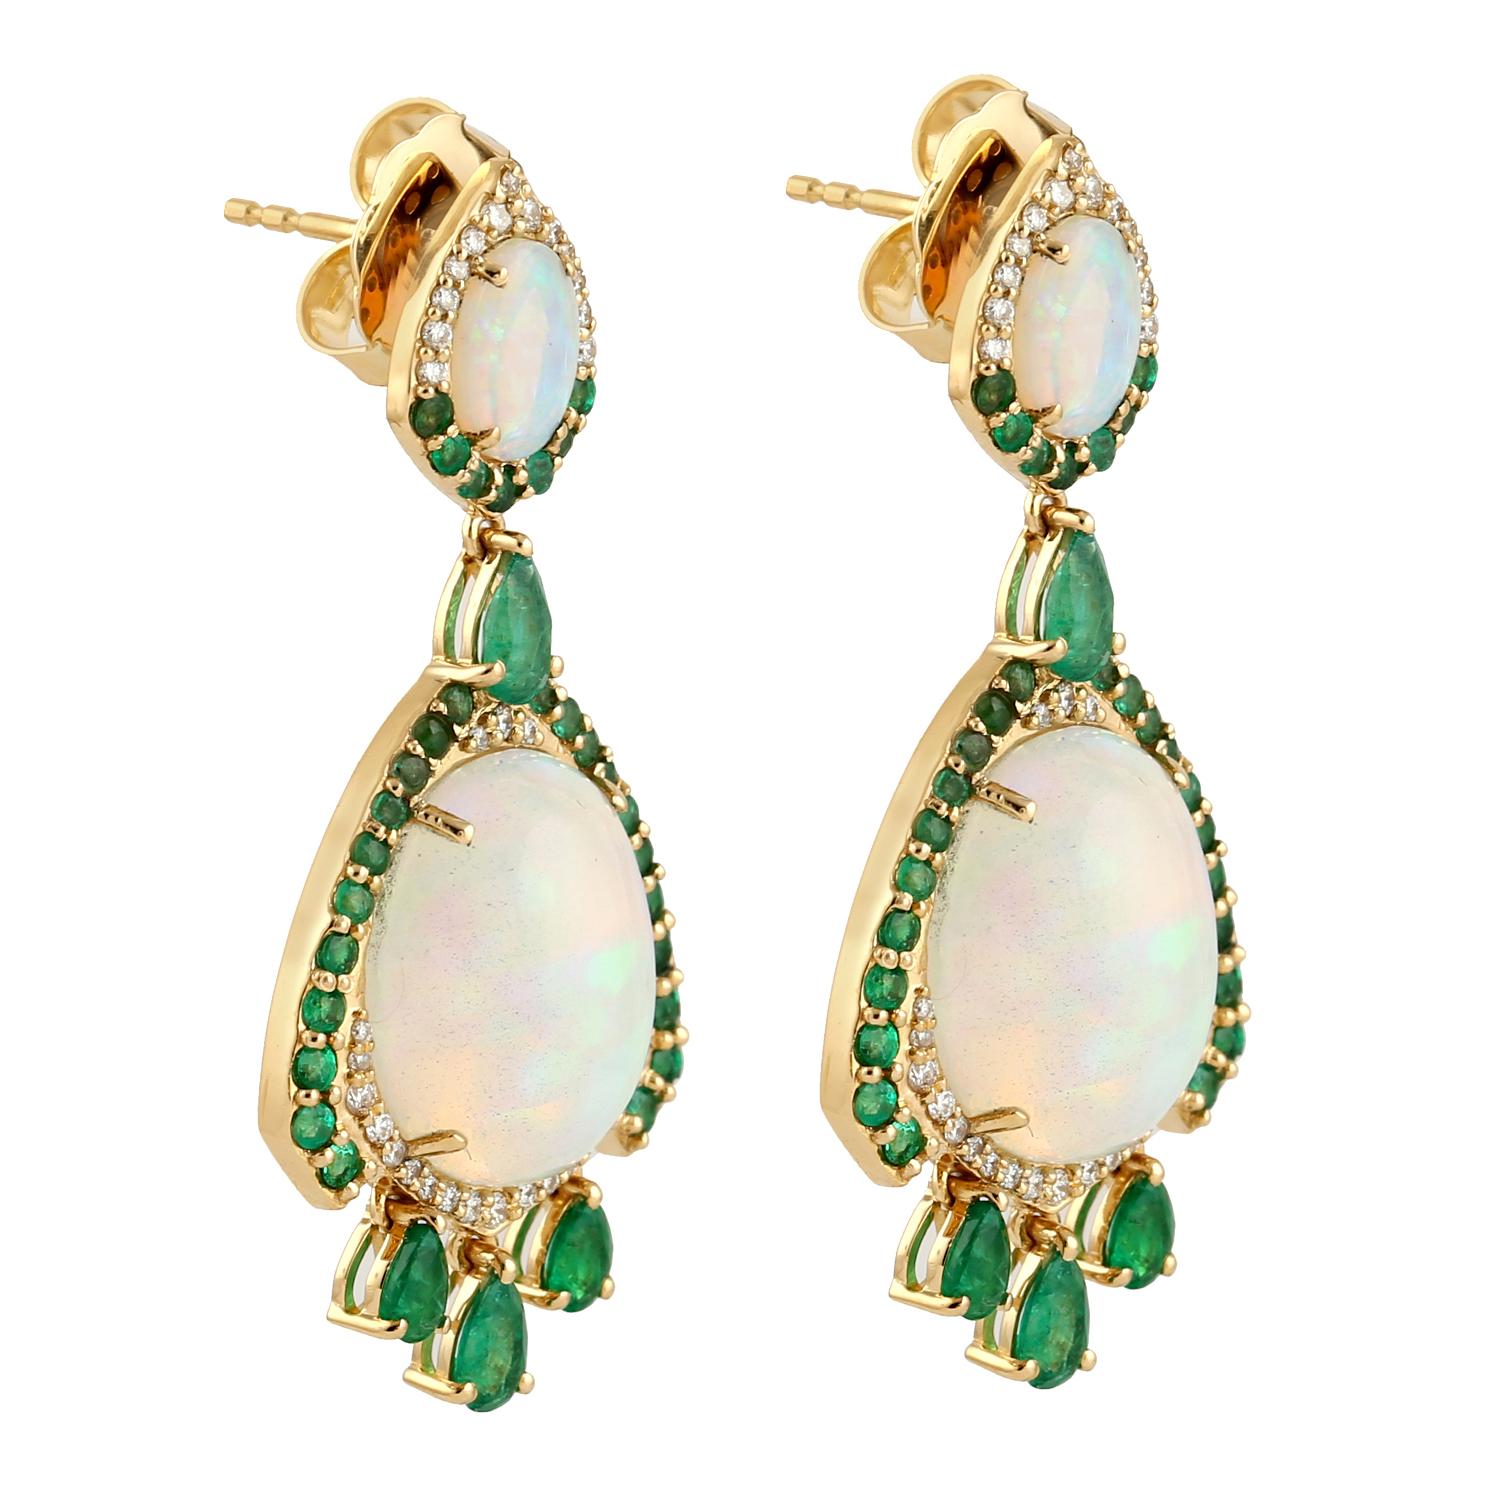 Cast in 18 karat gold. These stud earrings are hand set in 10.87 carats Ethiopian opal, 2.23 carats emerald and .36 carats of sparkling diamonds. 

FOLLOW MEGHNA JEWELS storefront to view the latest collection & exclusive pieces. Meghna Jewels is